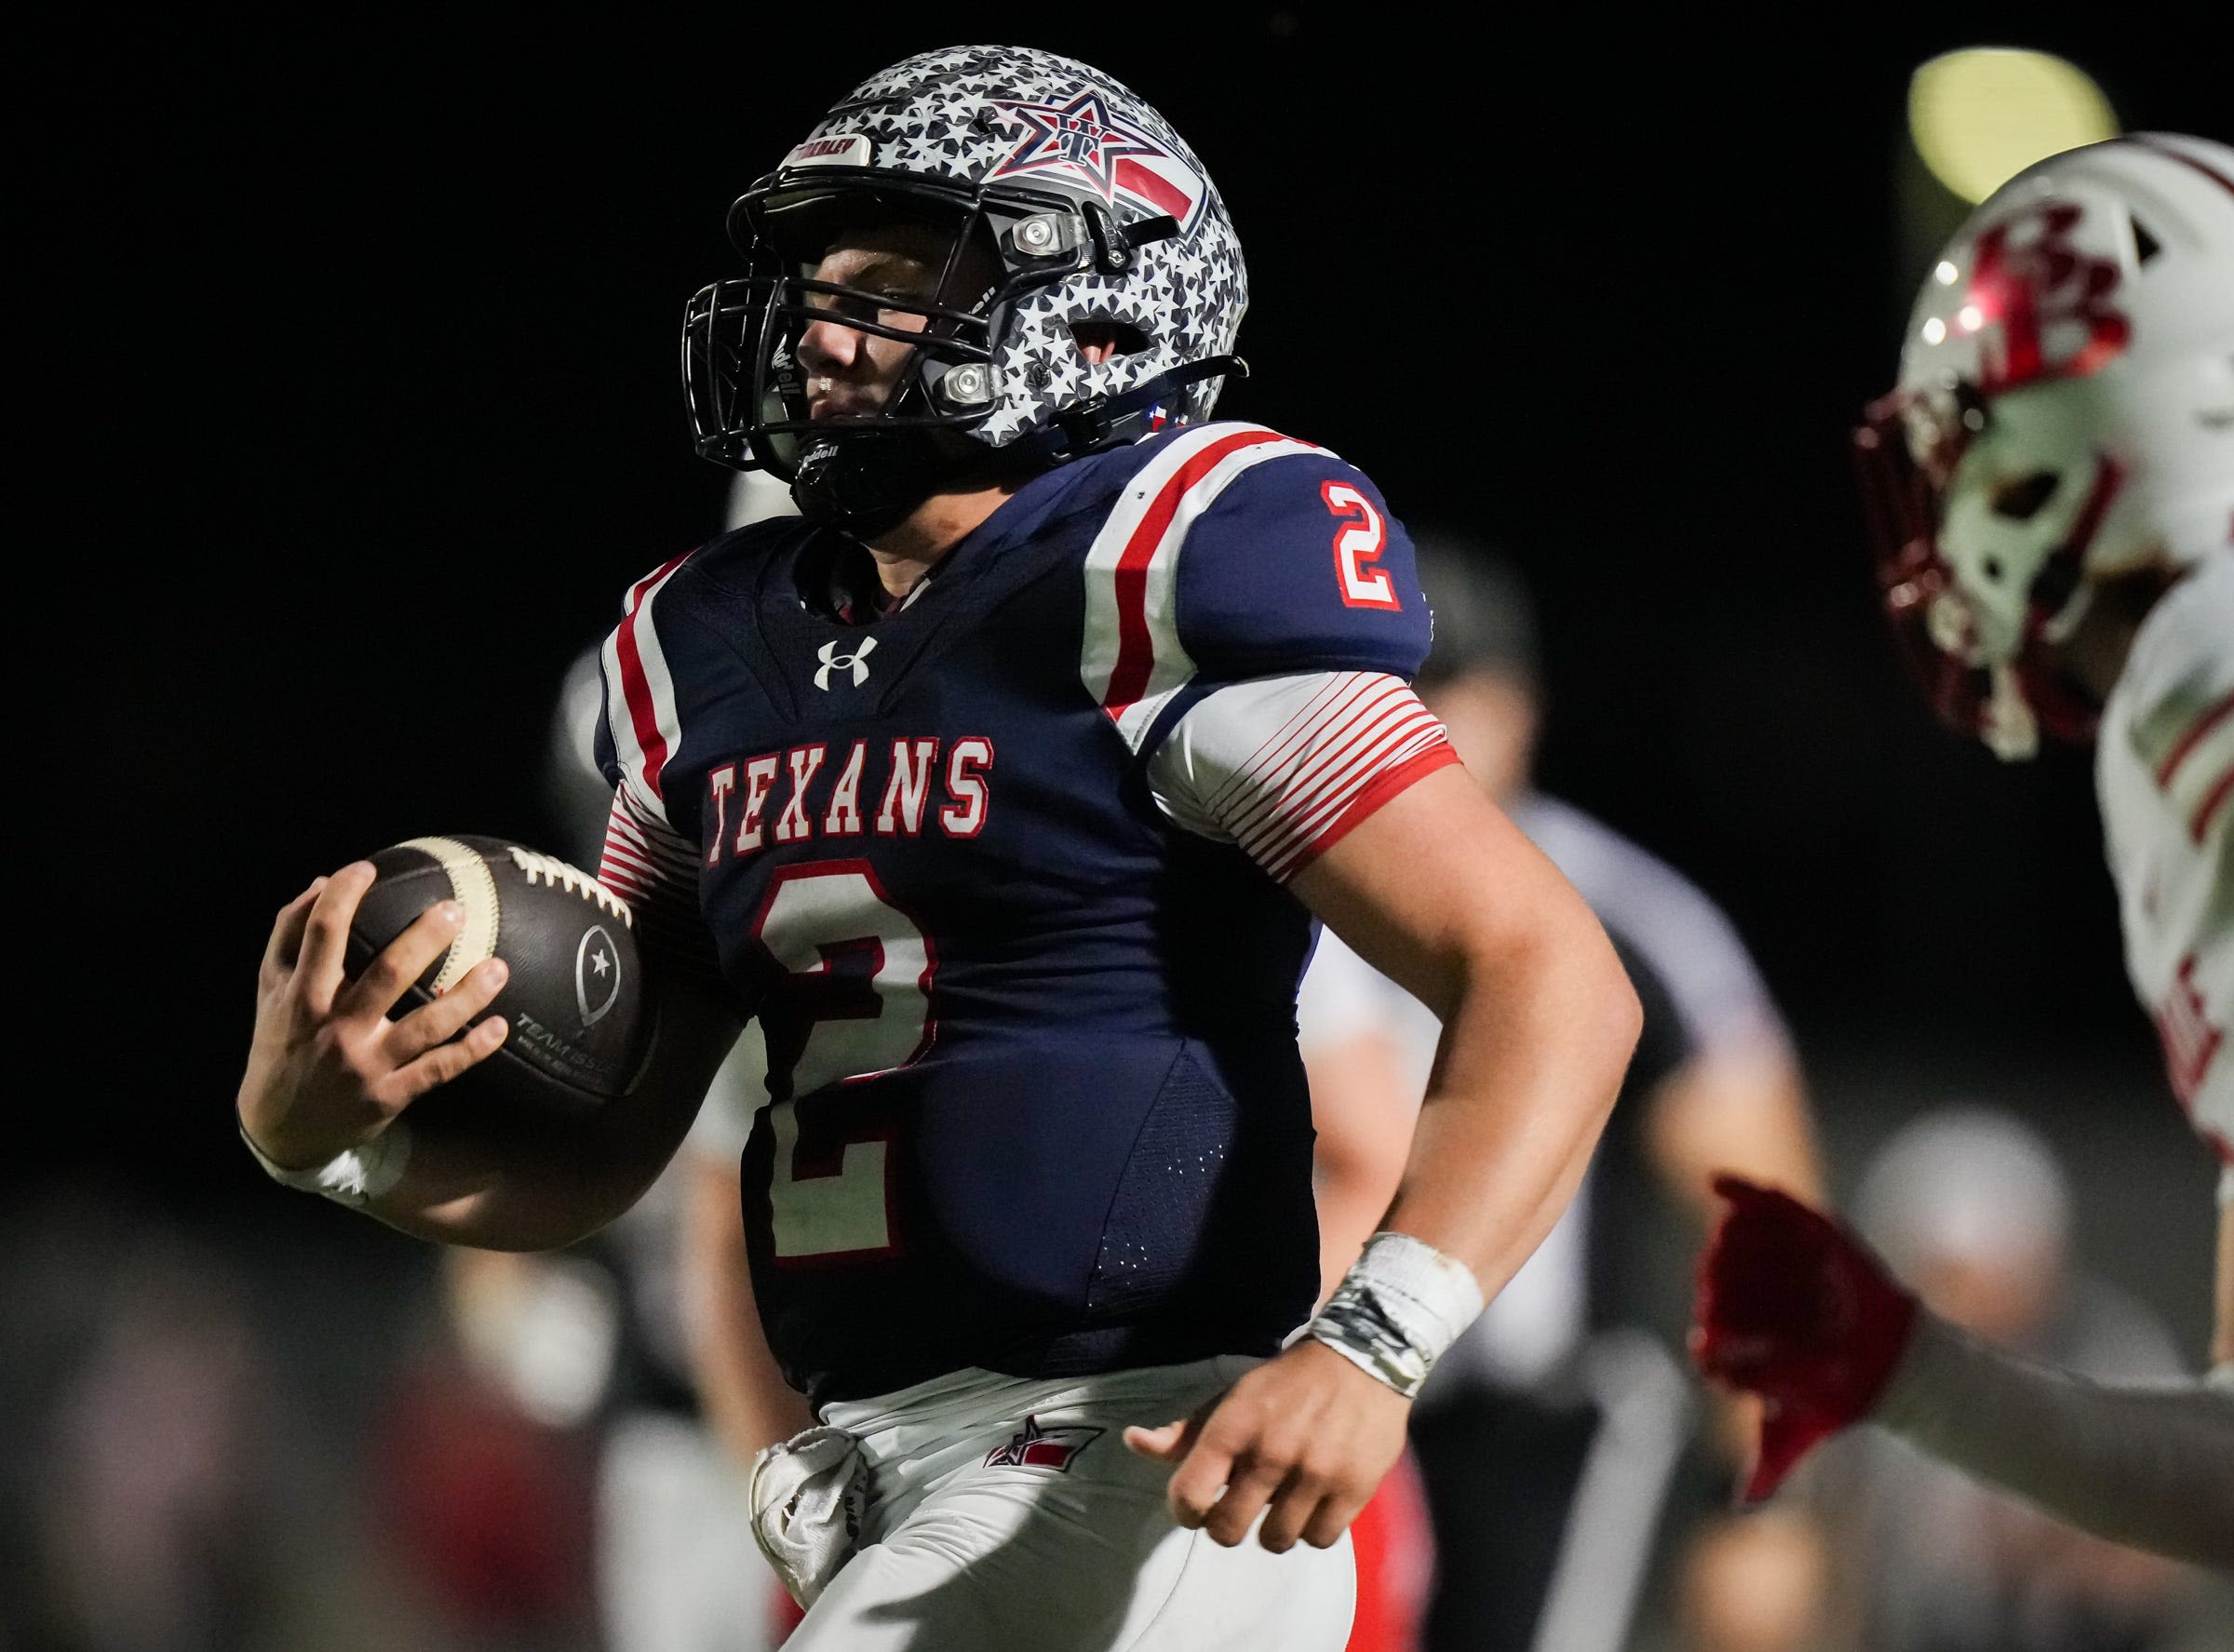 For Wimberley quarterback Cody Stoever, absorbing and delivering hits part of his DNA